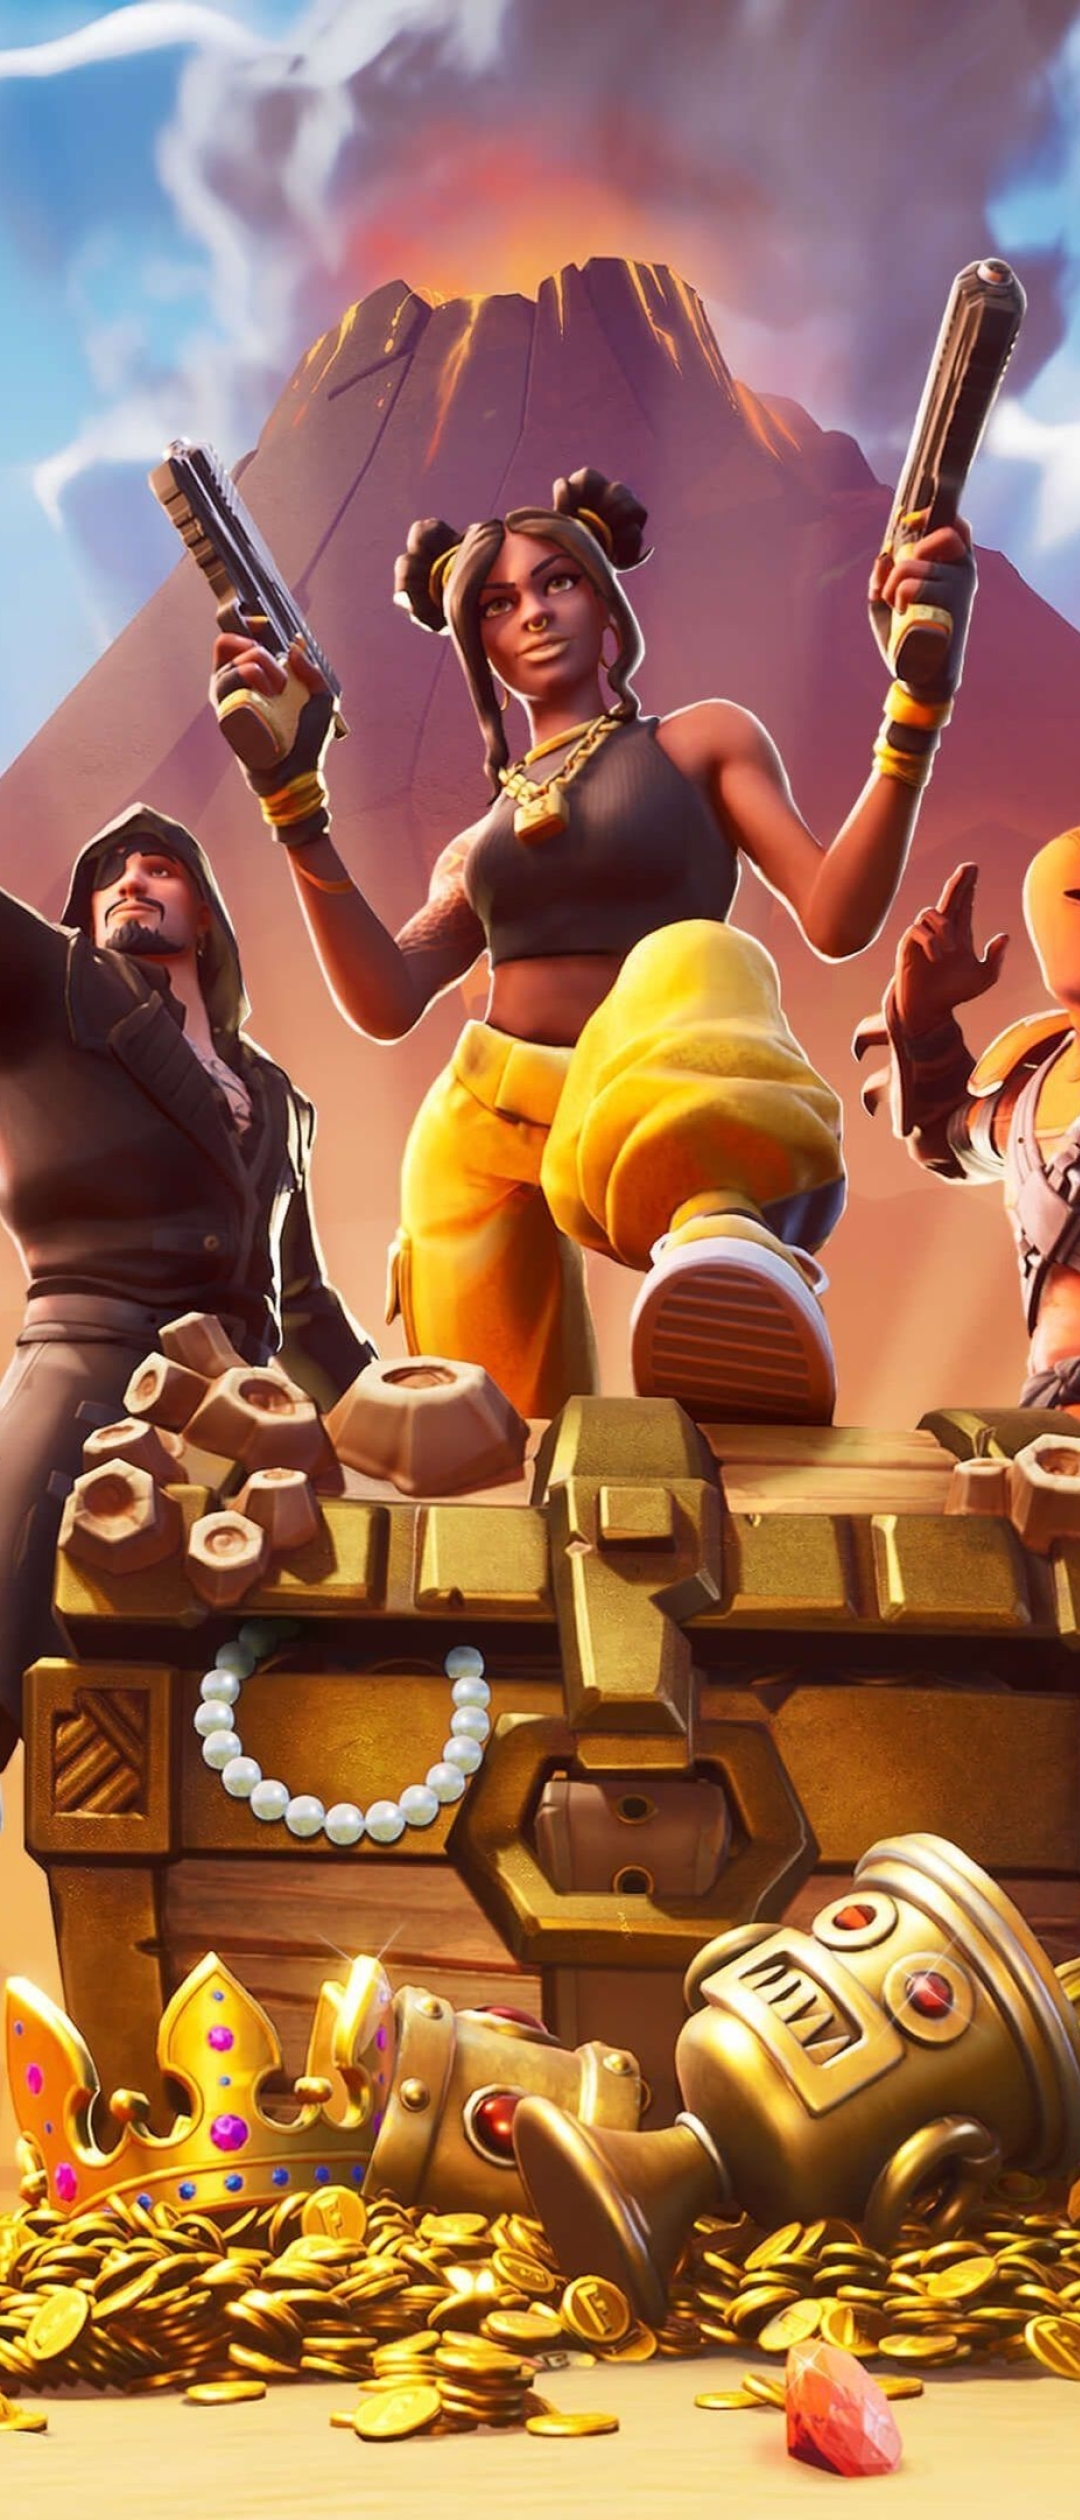 1080x2520 Fortnite Heroes 1080x2520 Resolution Wallpaper, HD Games 4K Wallpapers, Images, Photos ...